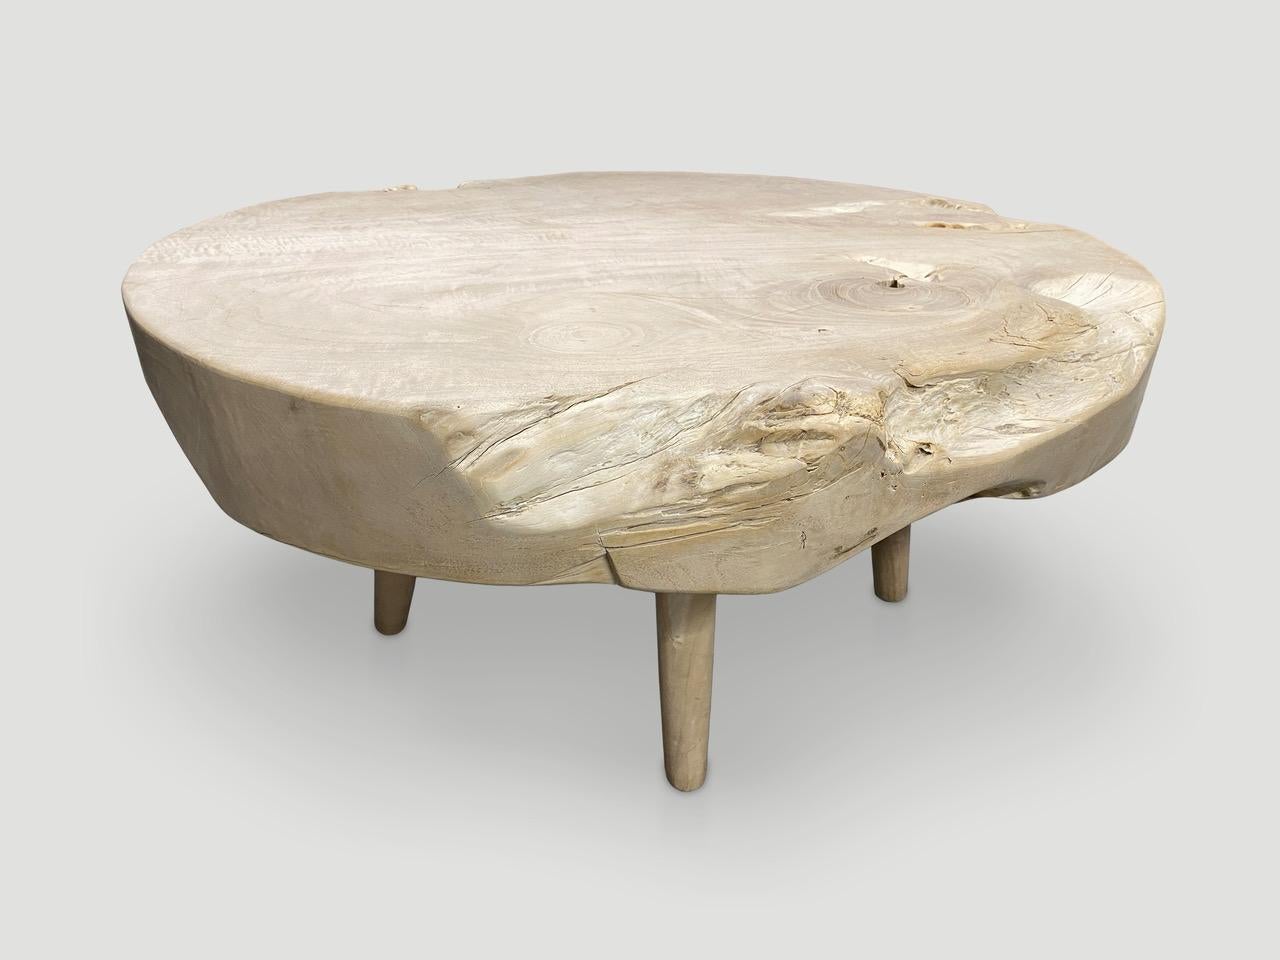 Impressive four and a half inch single slab reclaimed teak wood coffee table. We bleached the teak and added a light white wash revealing the beautiful wood grain. Floating on mid century style legs. Organic with a twist. Also available charred and